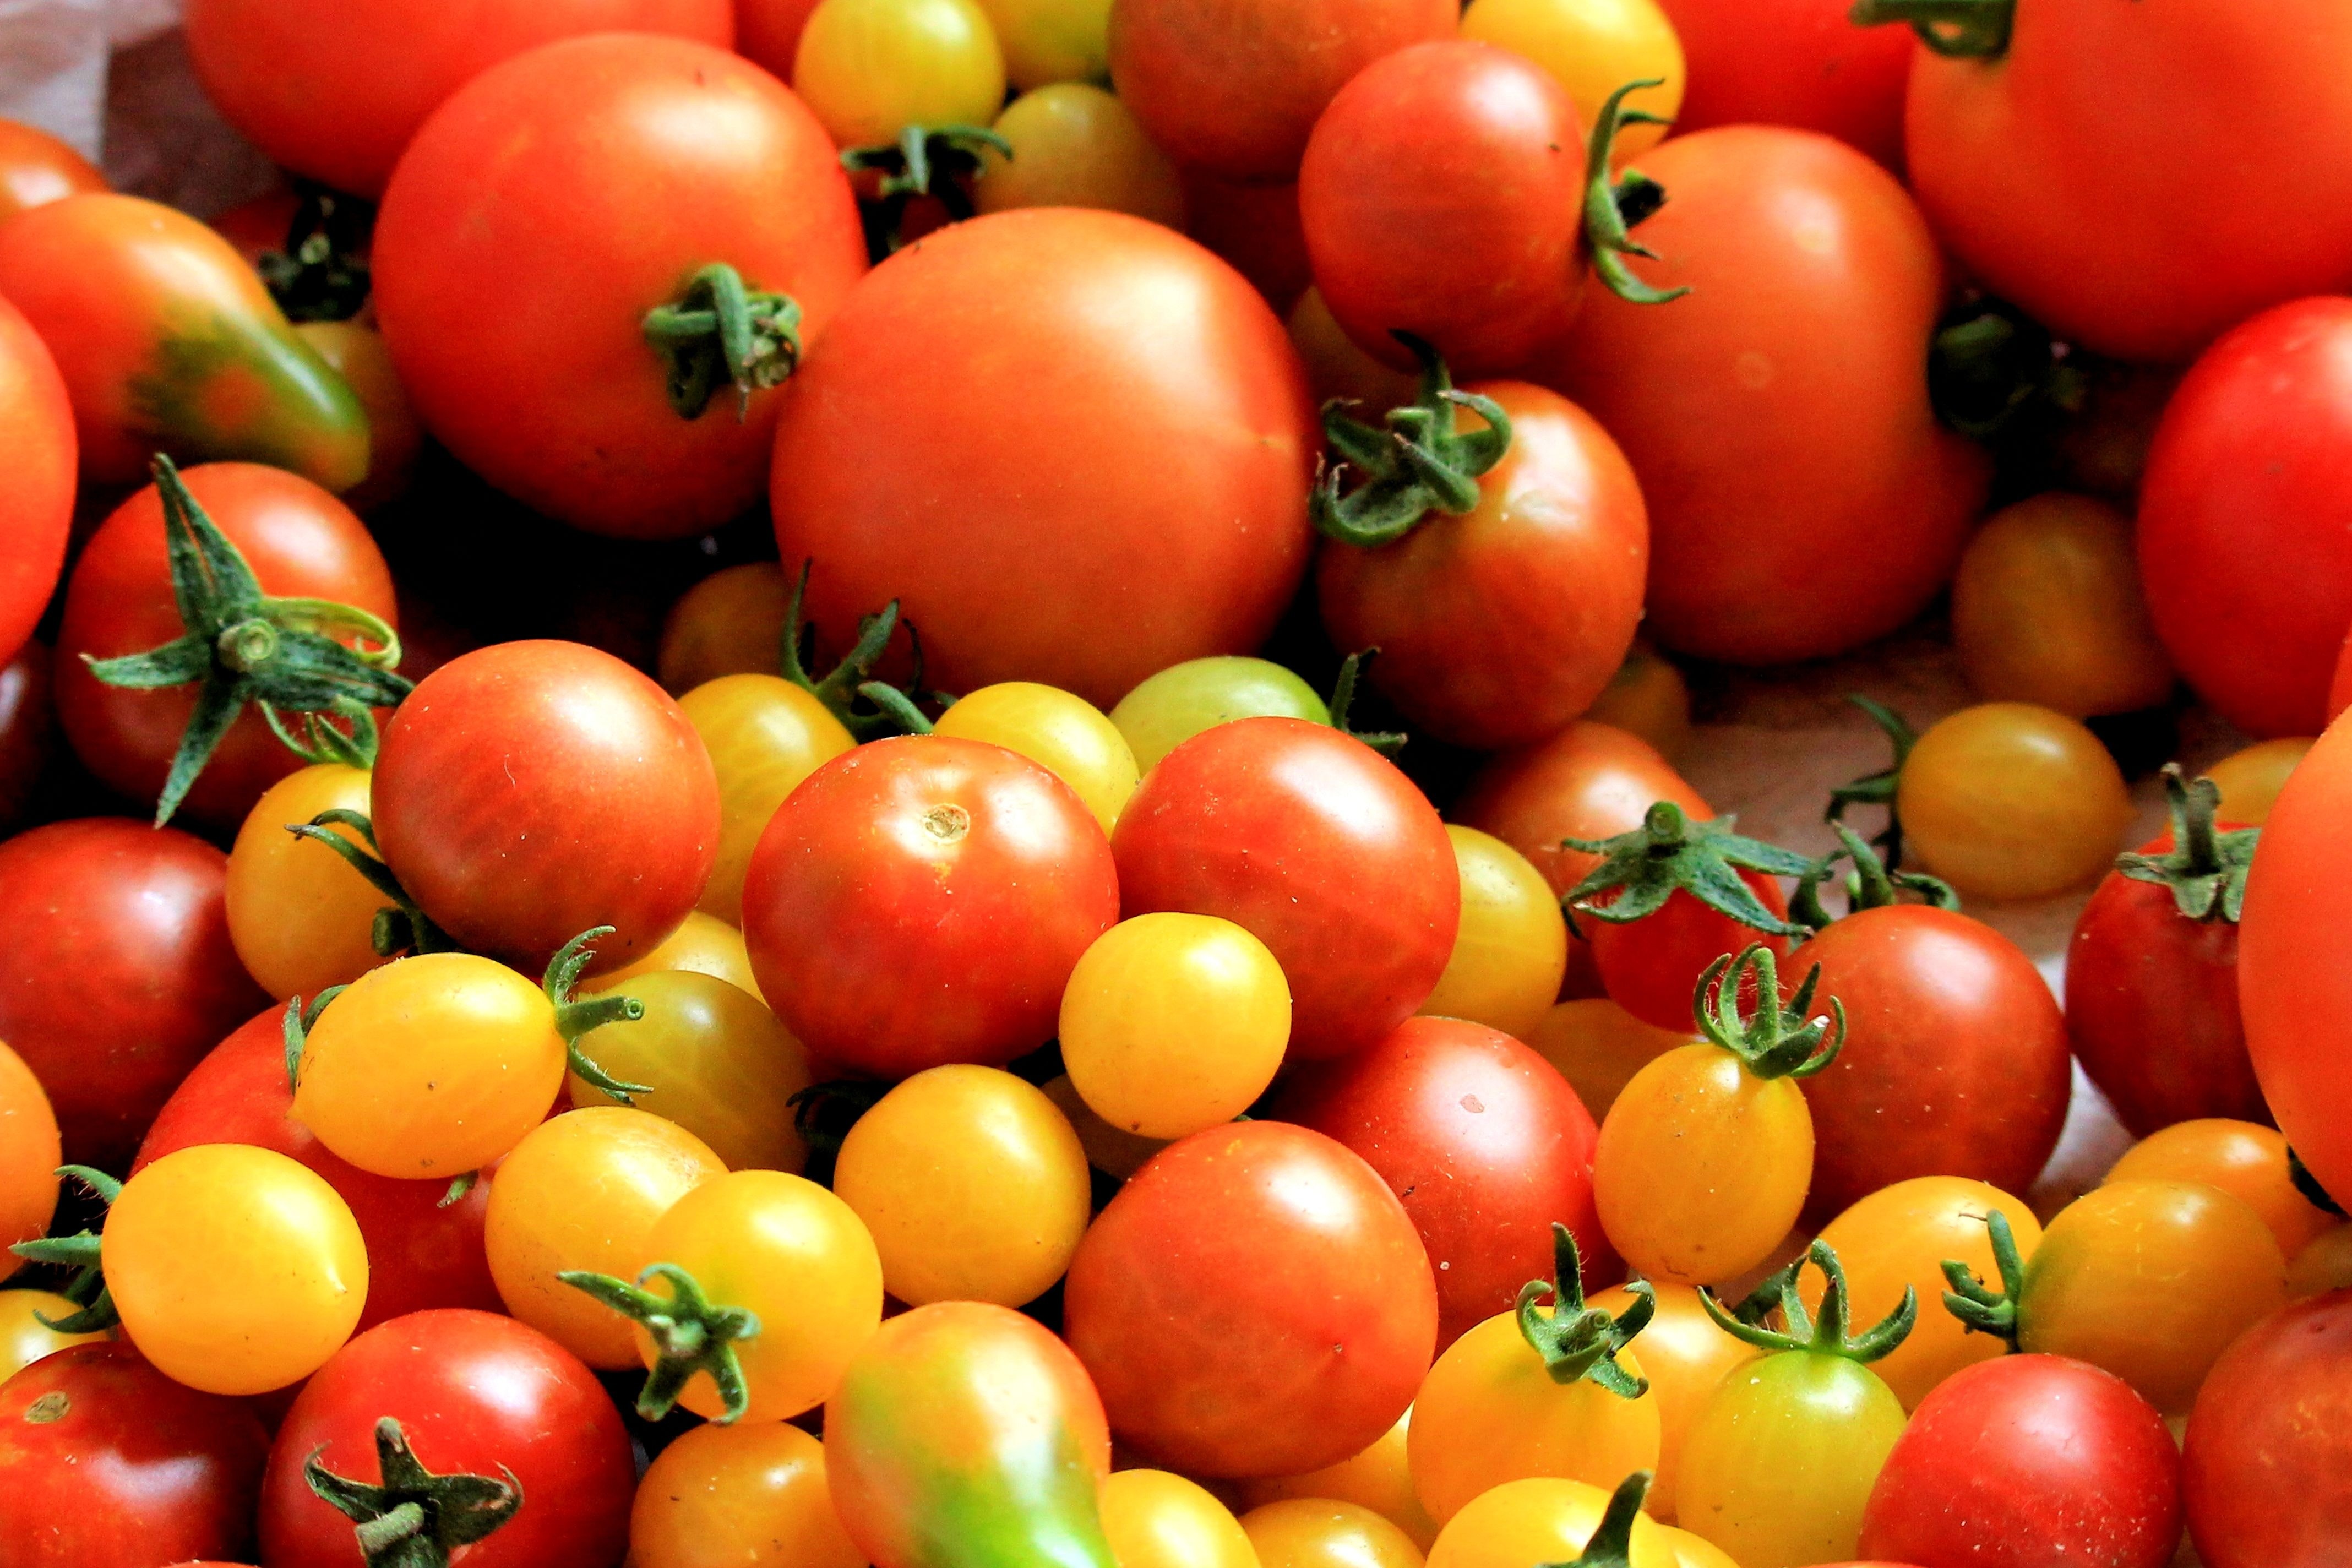 Totally Tomatoes! 28 Spectacular Tomato Varieties to Explore